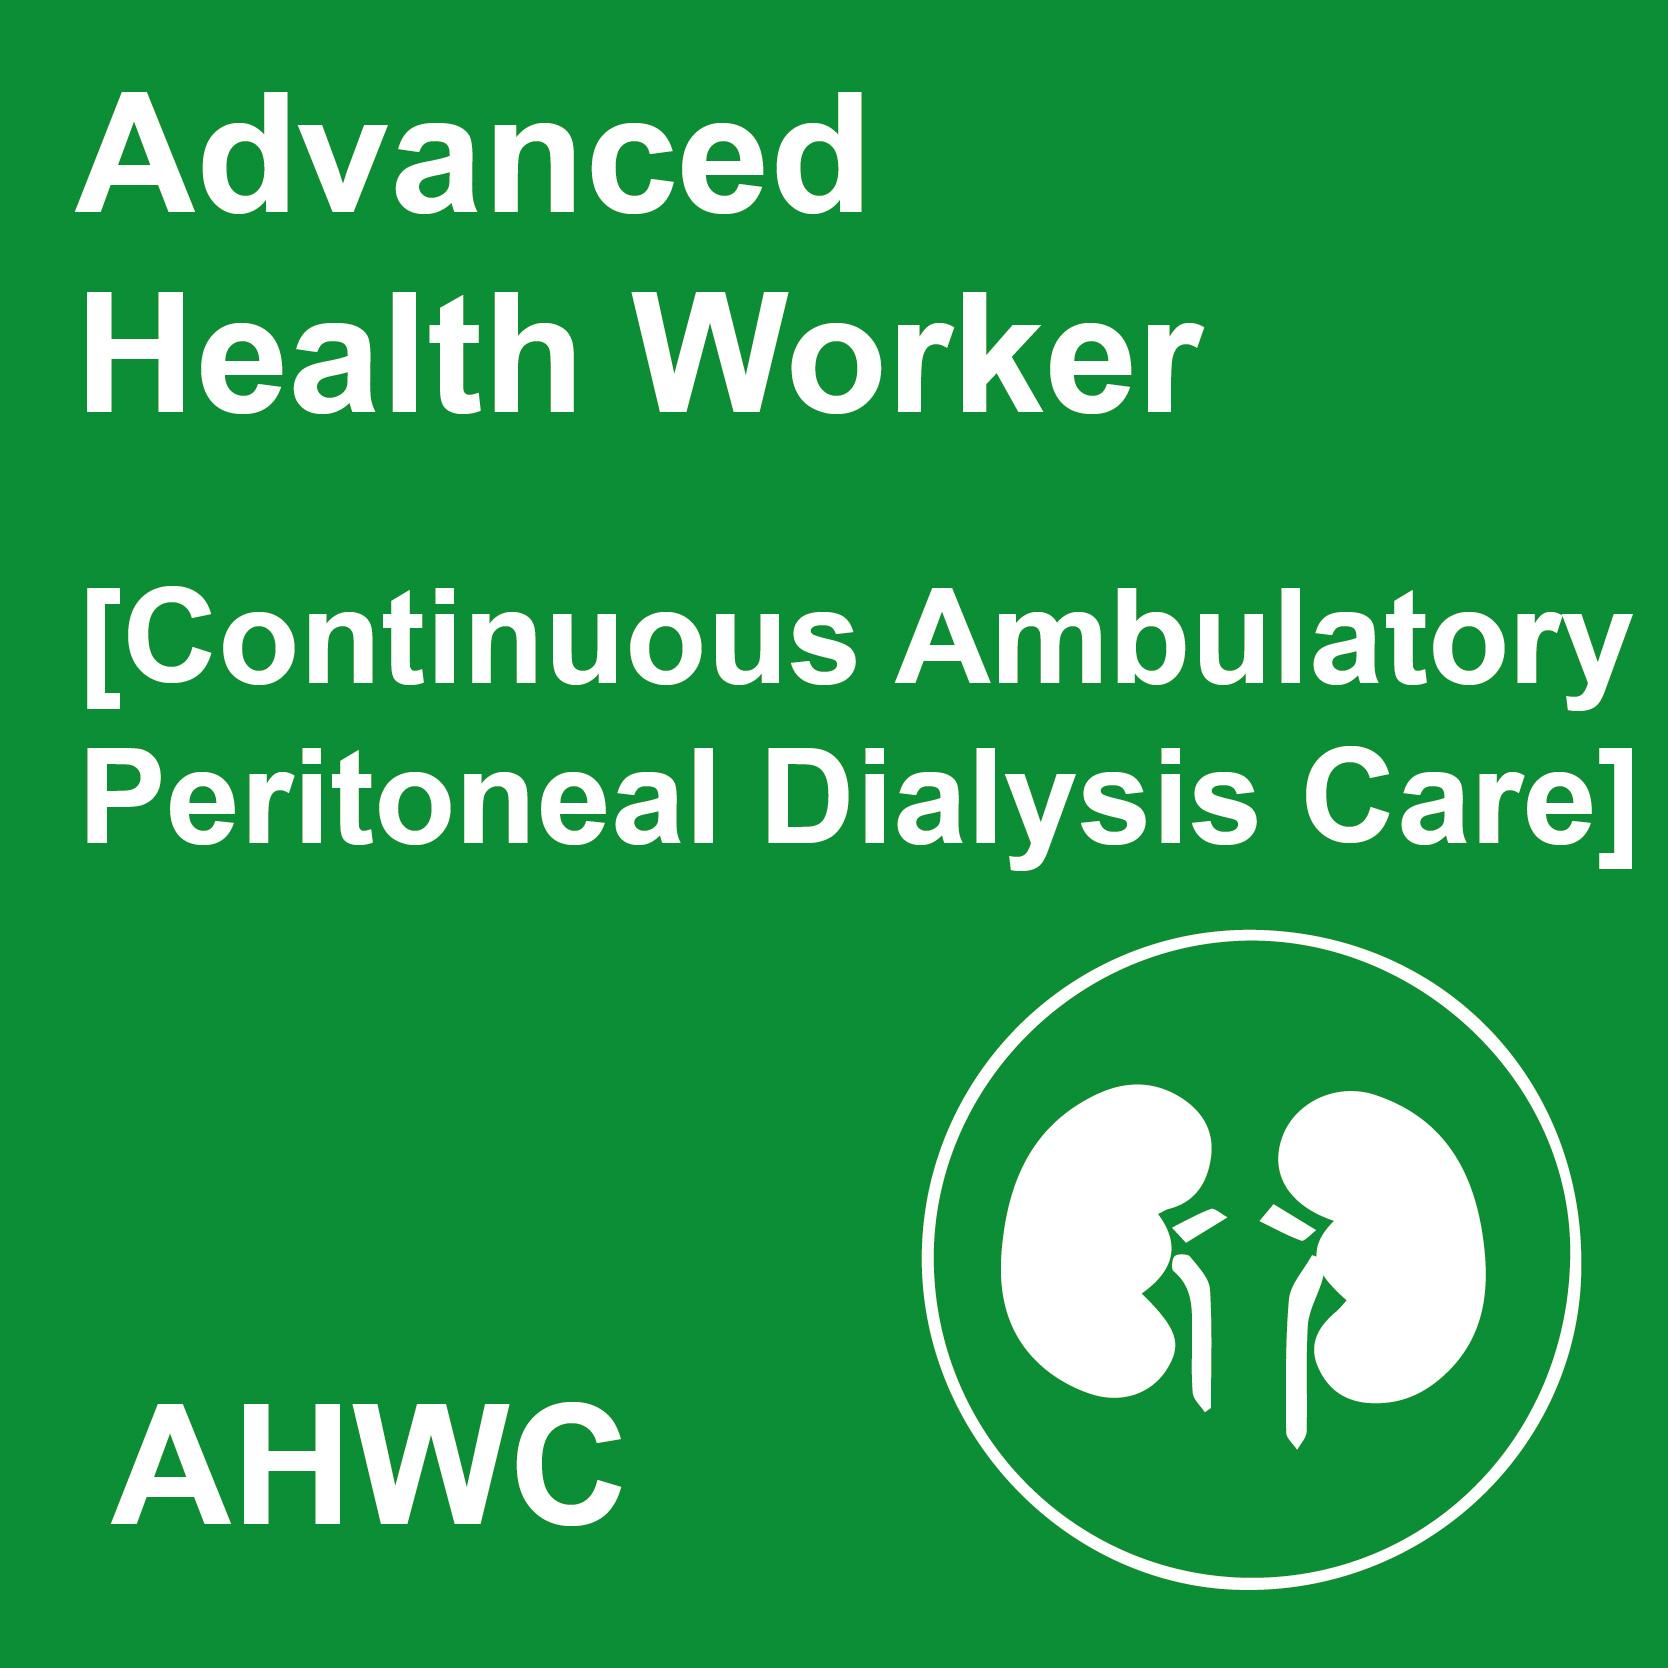 Advanced Health Worker Training Course (Continuous Ambulatory Peritoneal Dialysis Care)